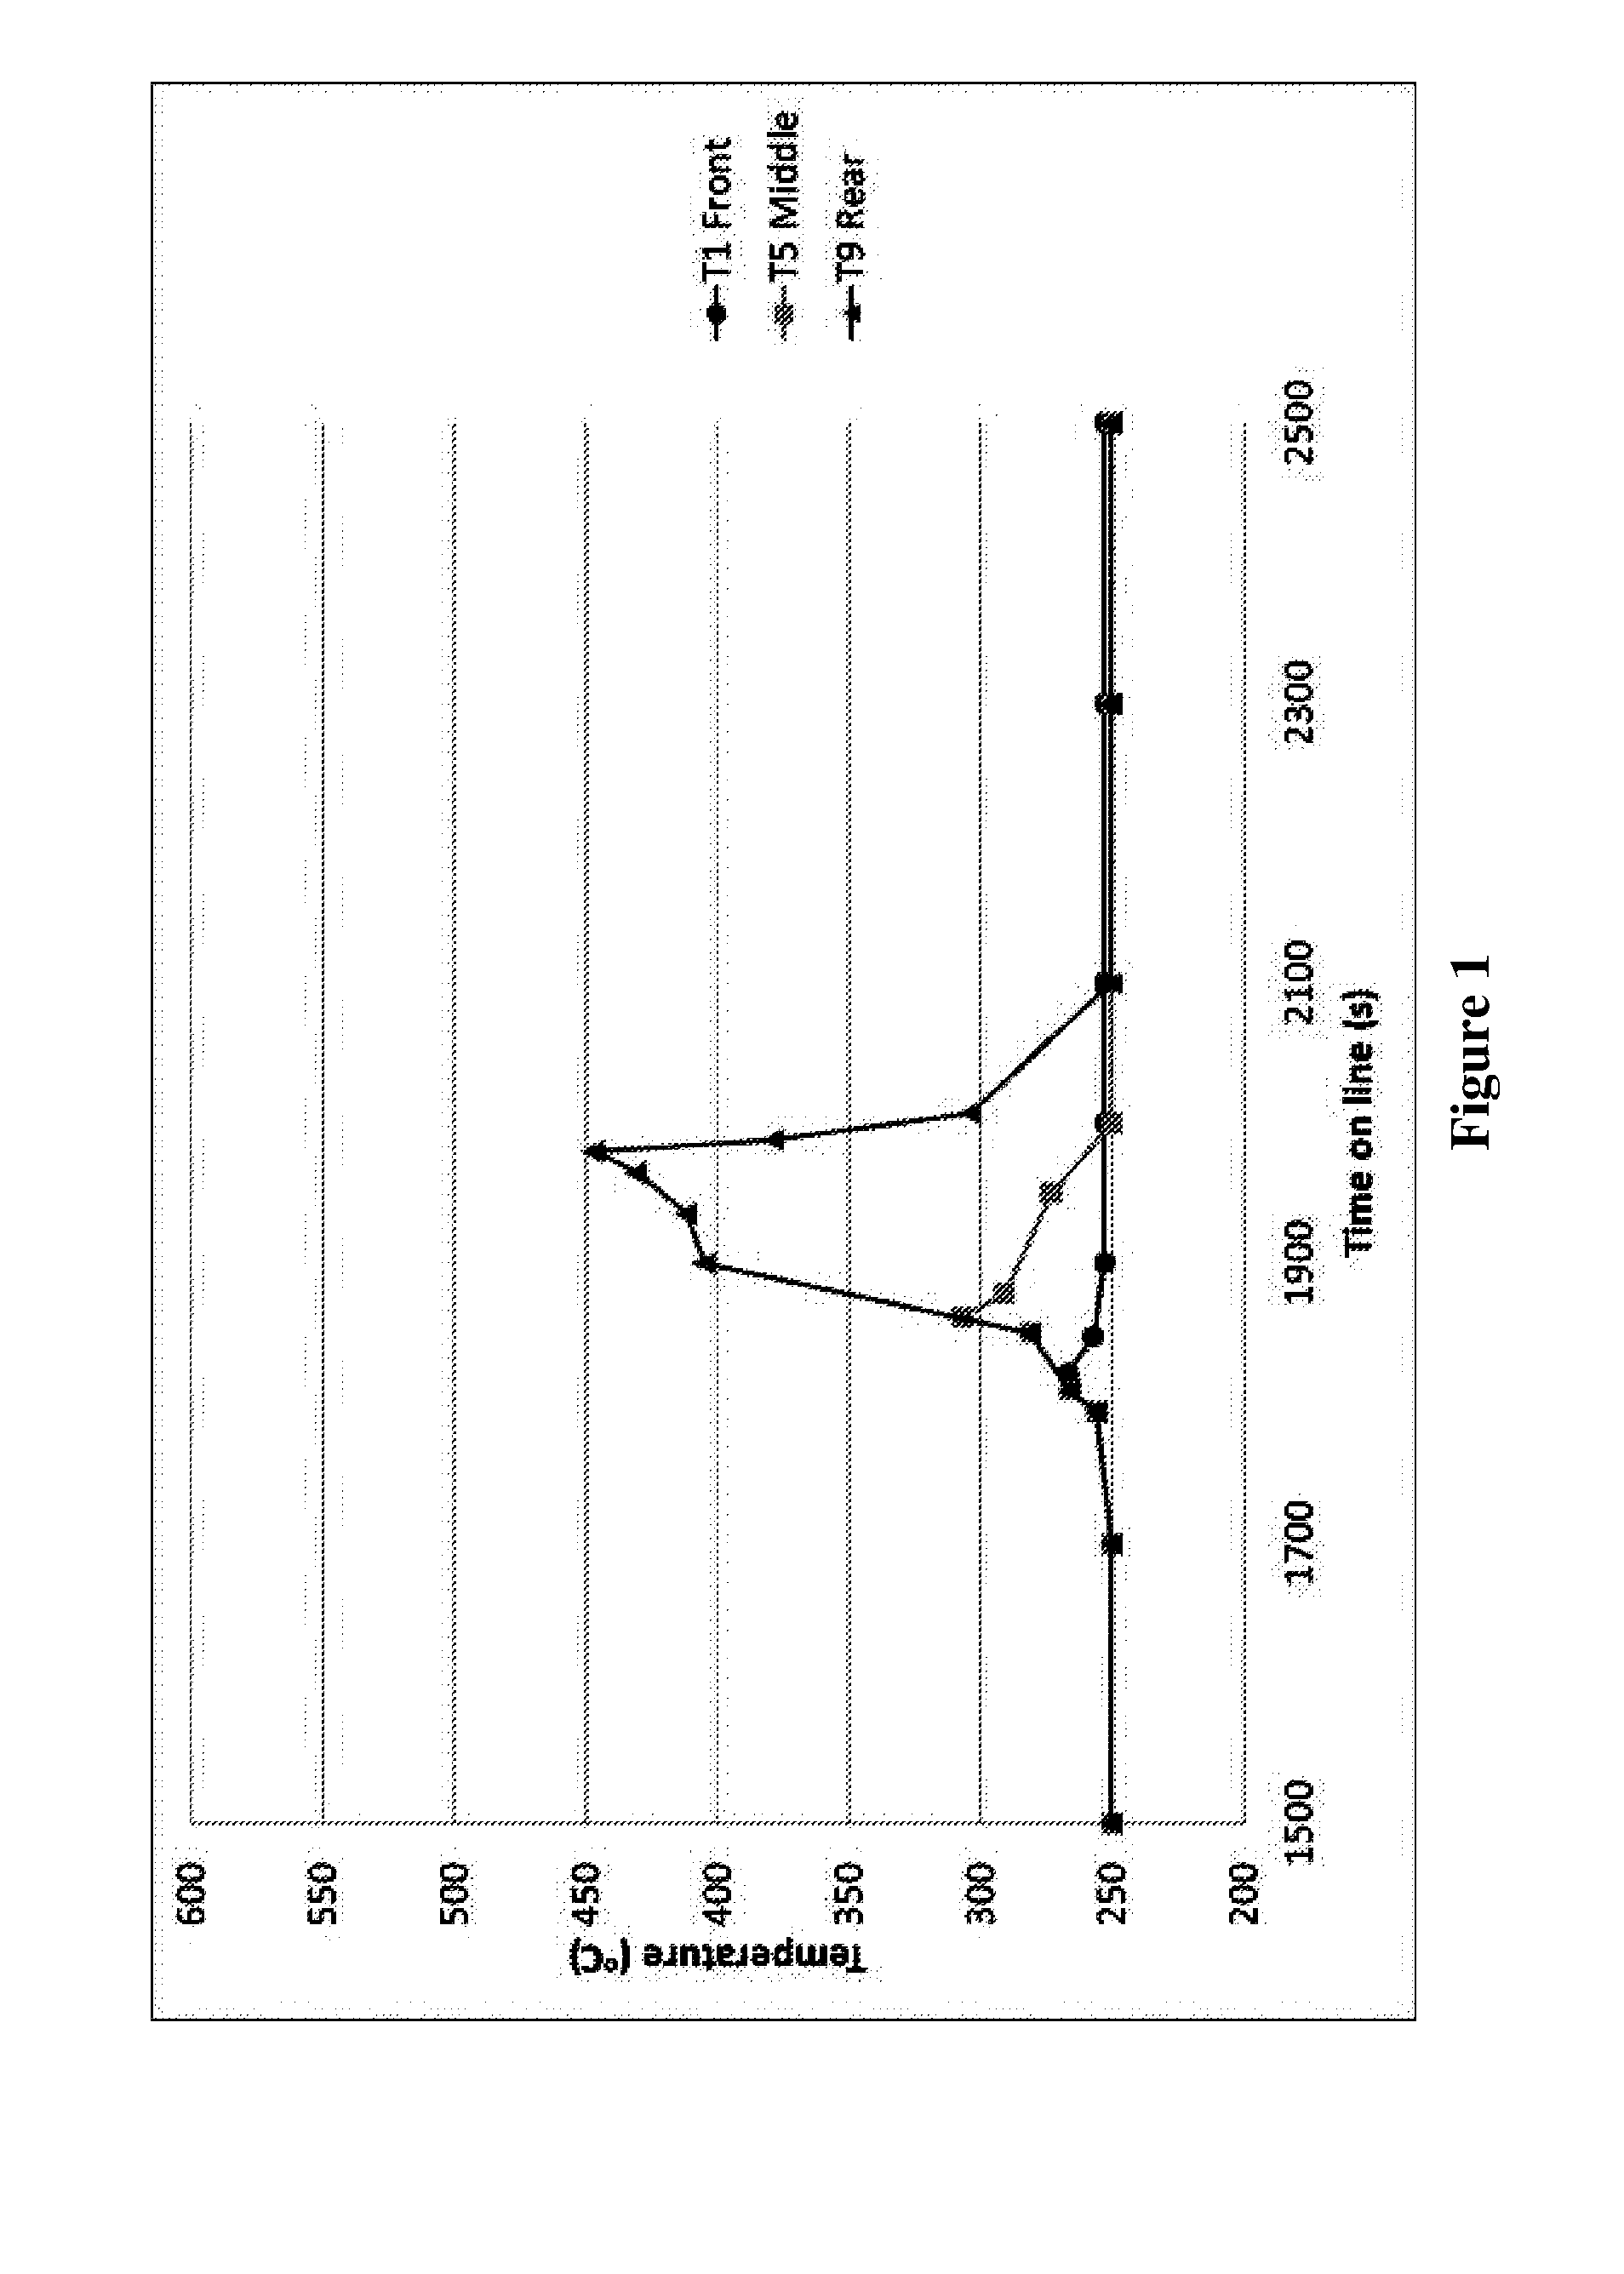 Automotive catalytic aftertreatment system